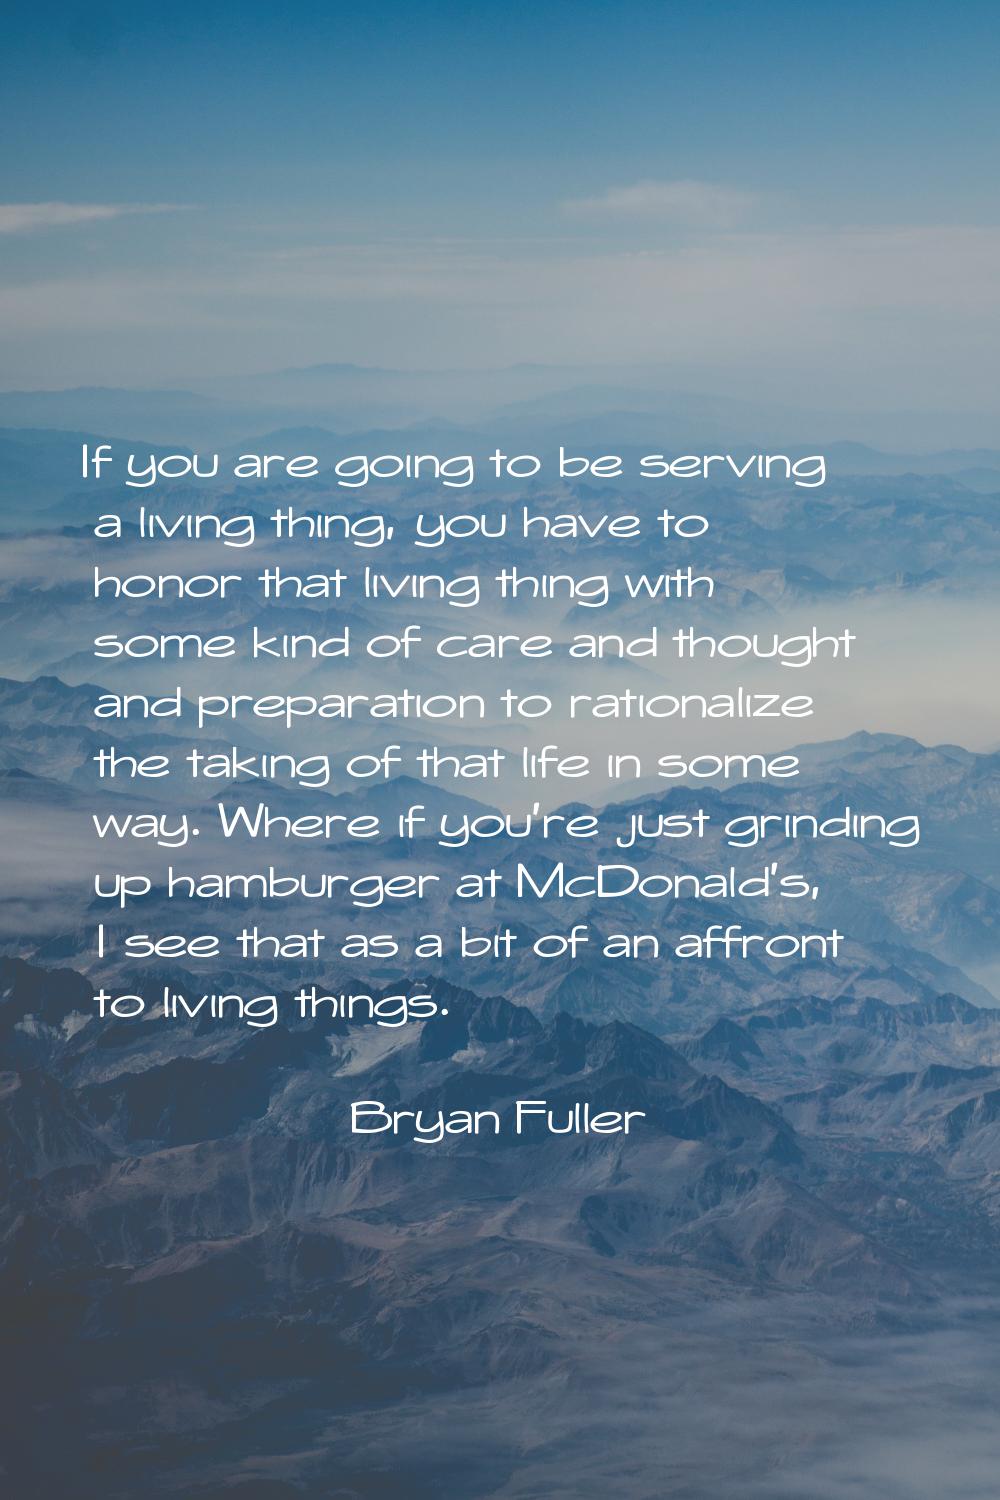 If you are going to be serving a living thing, you have to honor that living thing with some kind o